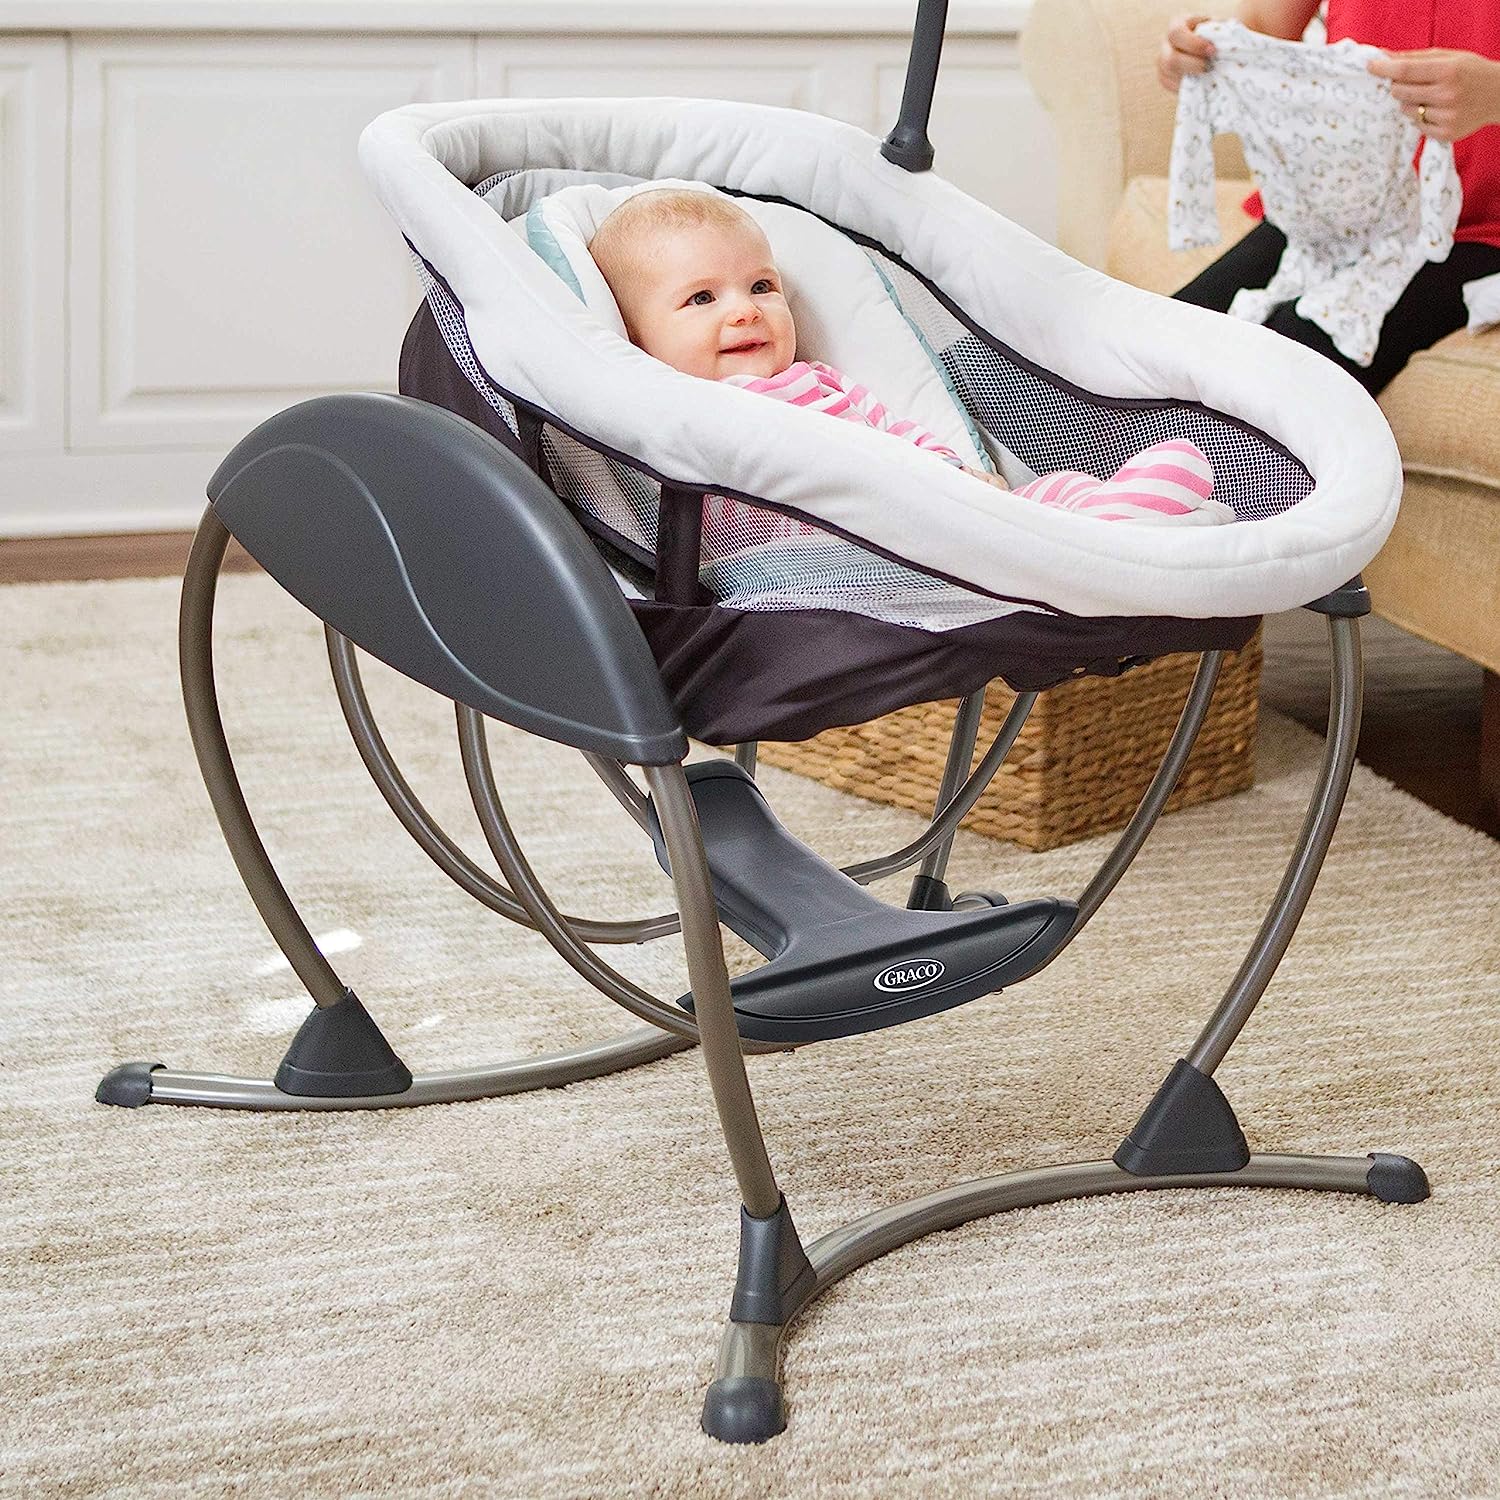 What Exactly is the Graco DuoGlider?